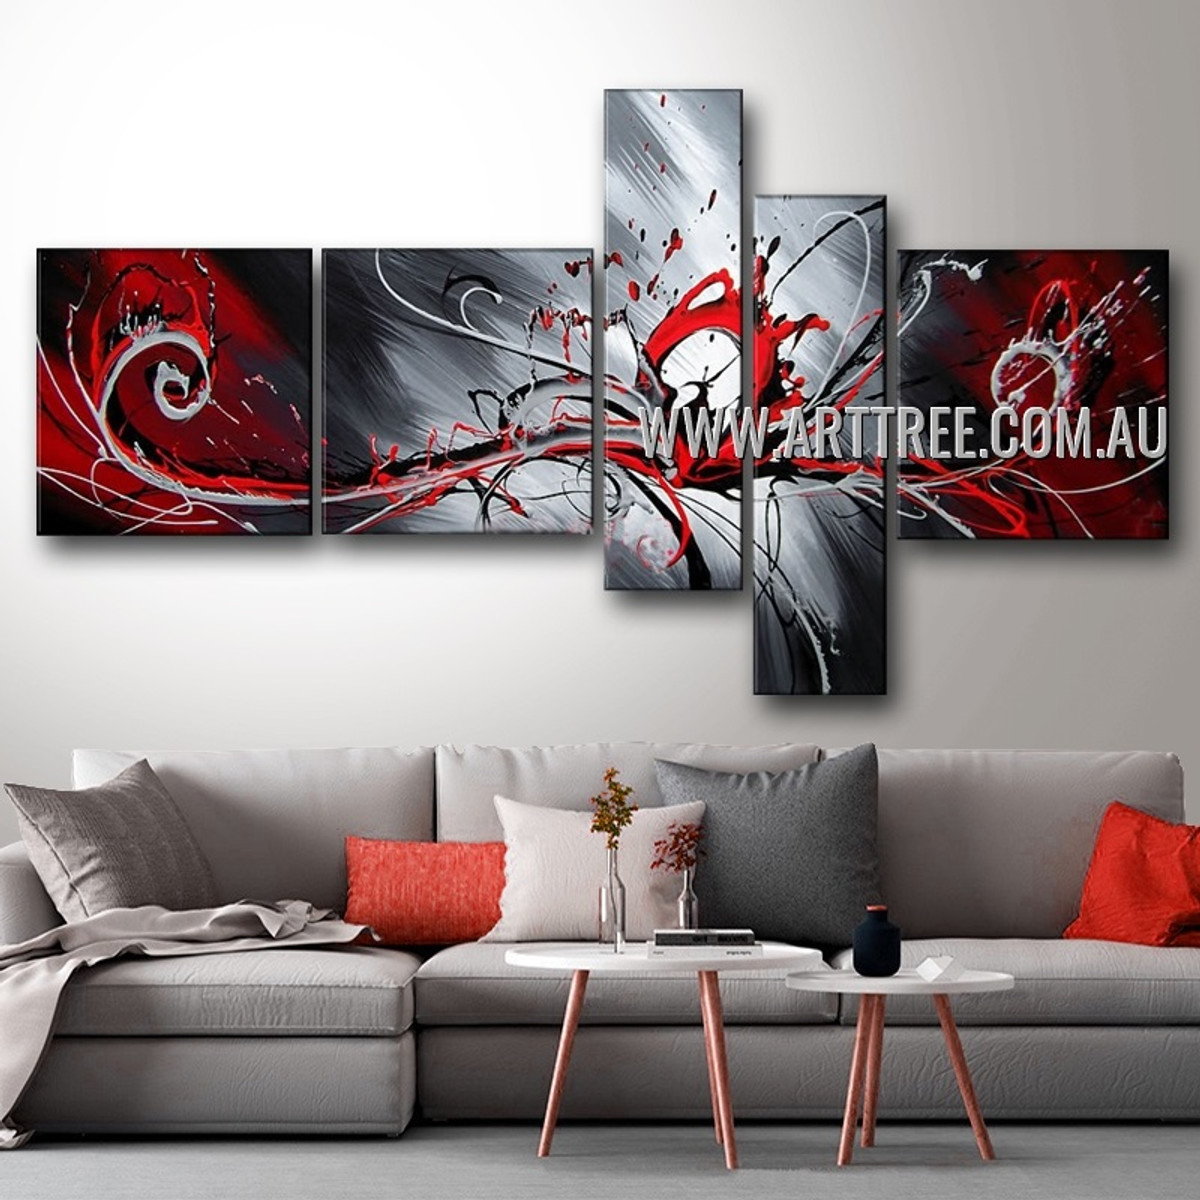 Colorful Splash Abstract Modern 5 Piece Multi Panel Canvas Oil Painting Wall Art Set For Room Trimming